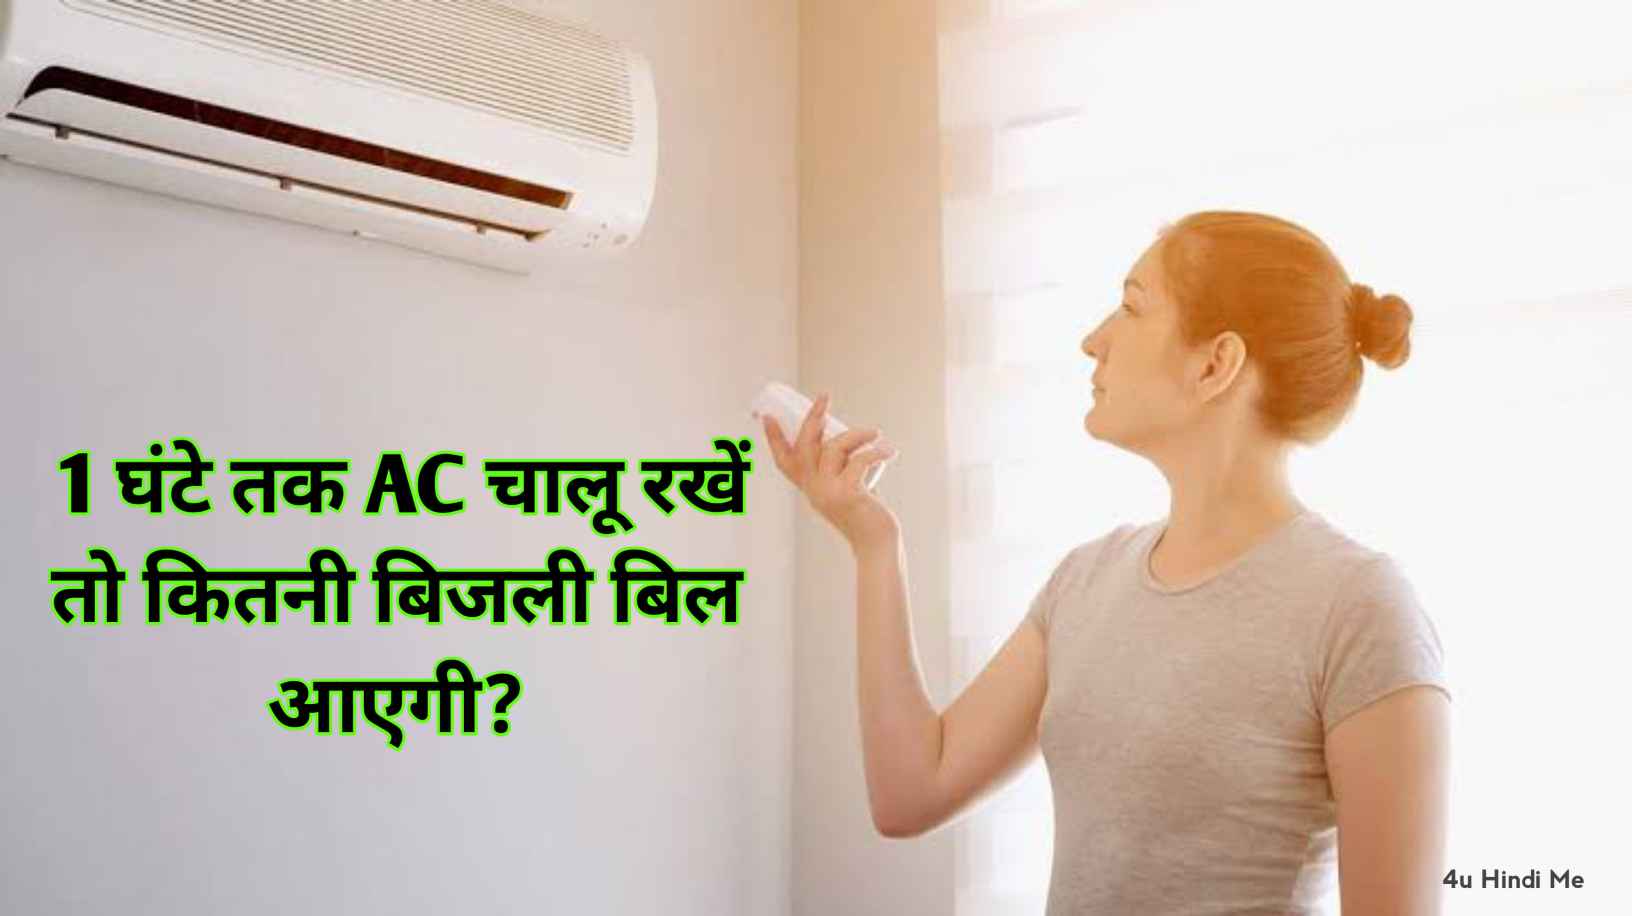 How much will be the electricity bill if you keep the AC running continuously for 1 hour